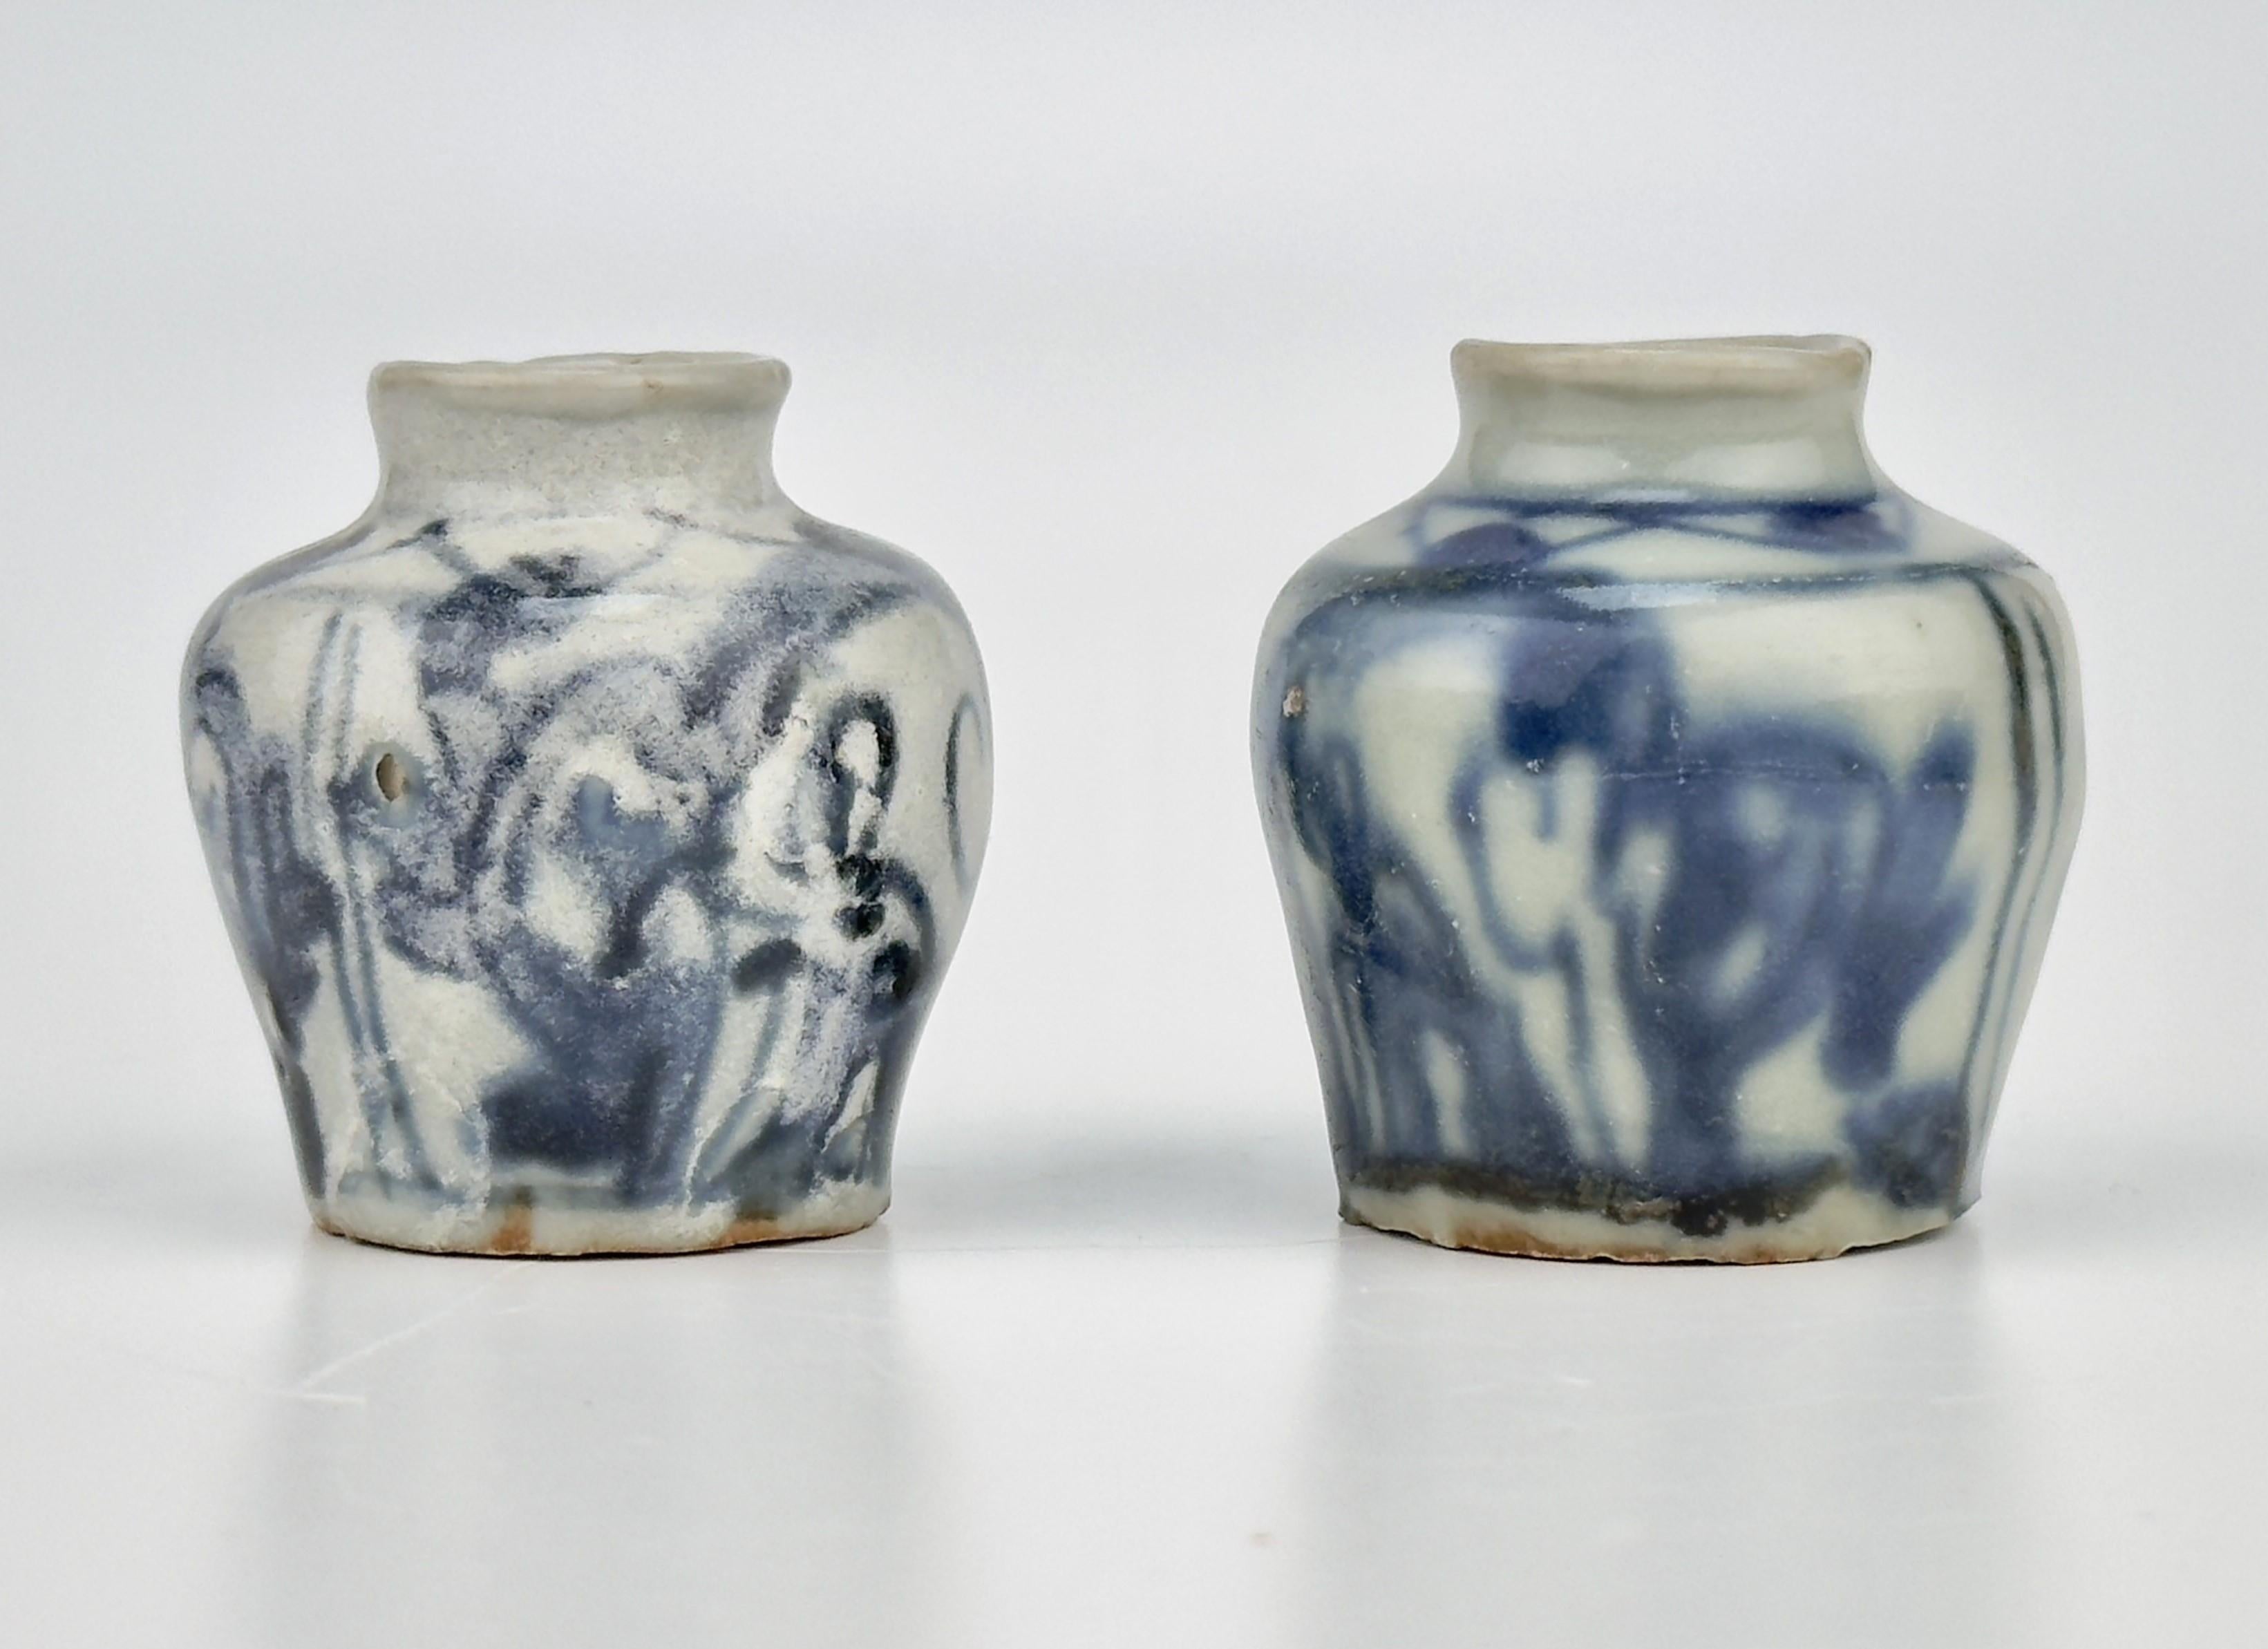 Pair of jarlet from the late Ming dynasty cargo. An identical piece is included on page 145 of the Bin Thuan catalog titled 'The Age of Discovery: Asian Ceramics Found Along the Maritime Silk Road'.

Period: Ming Dynasty (16-17th century)
Type: